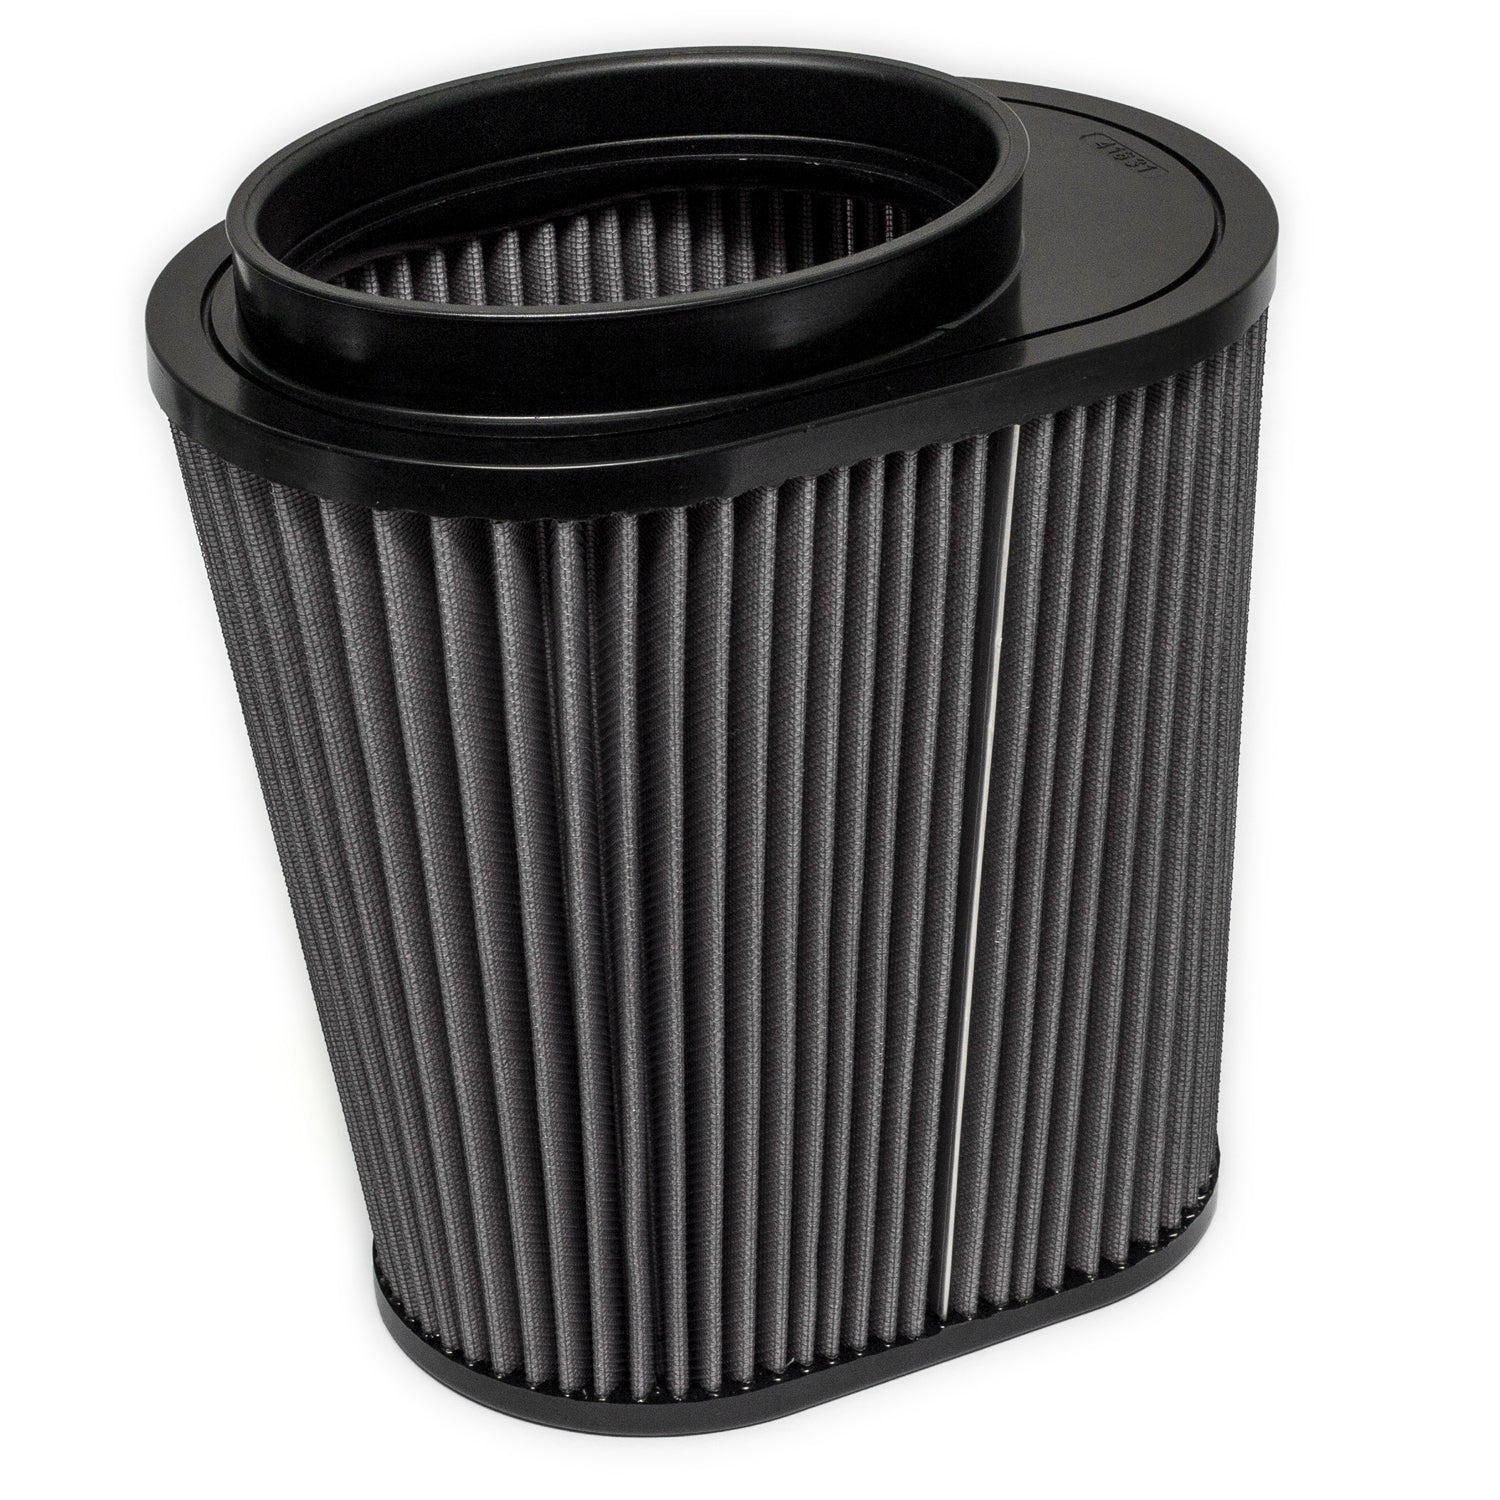 Big-Ass Dry Filter for Ford Ram-Air intake